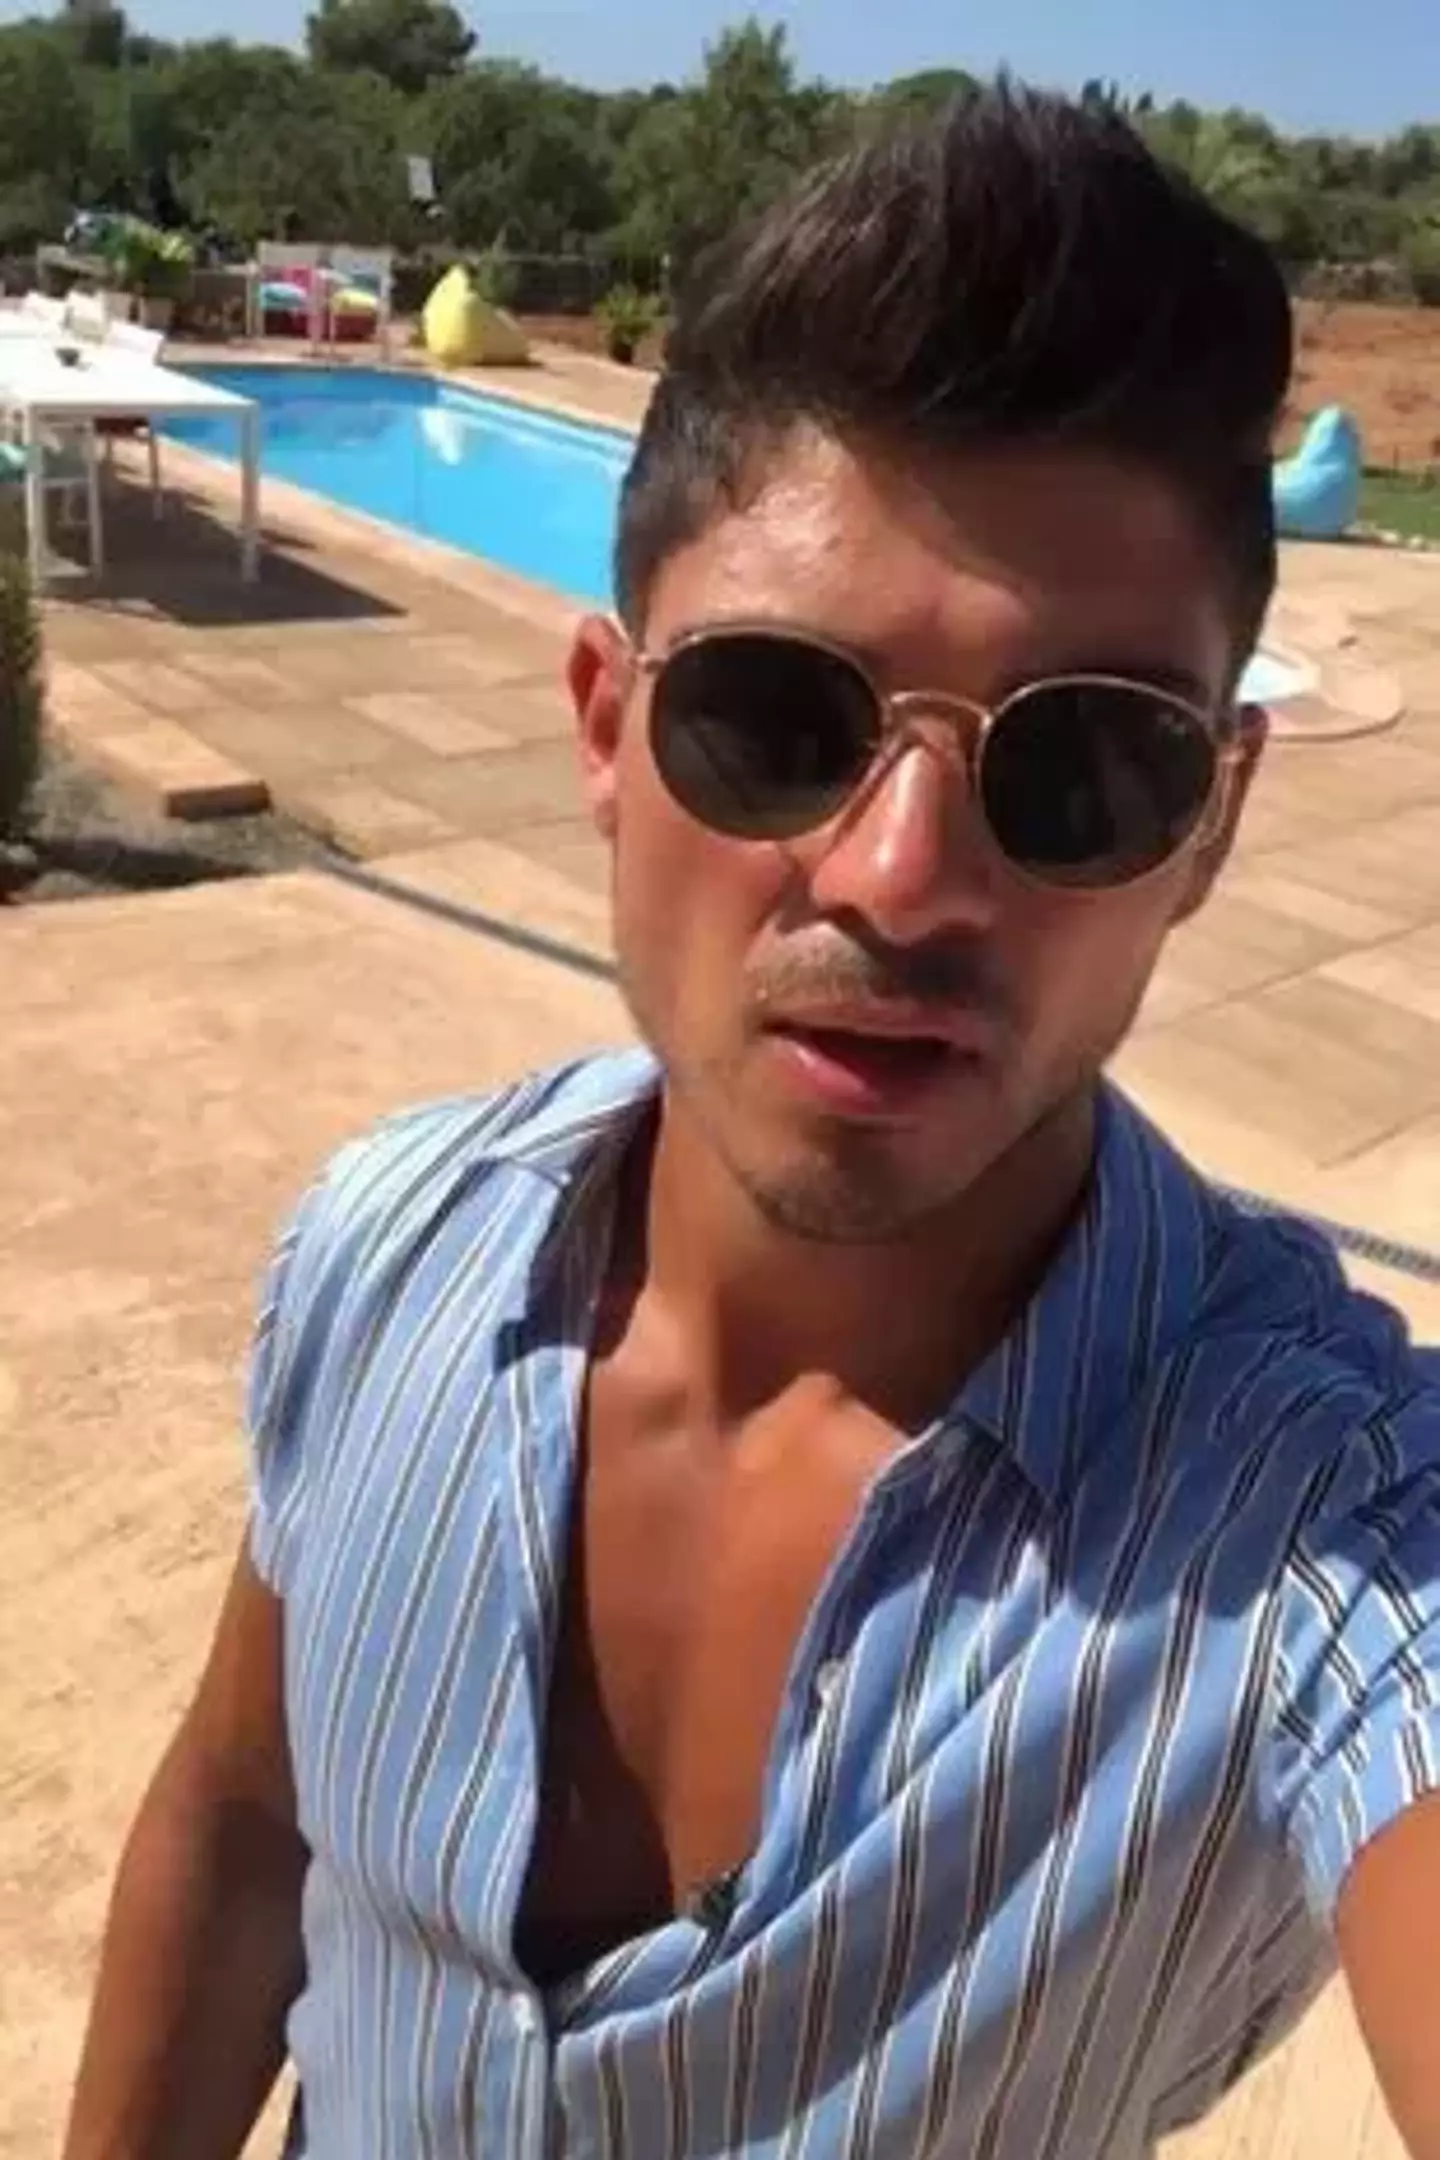 Anton first appeared on Love Island back in 2018.